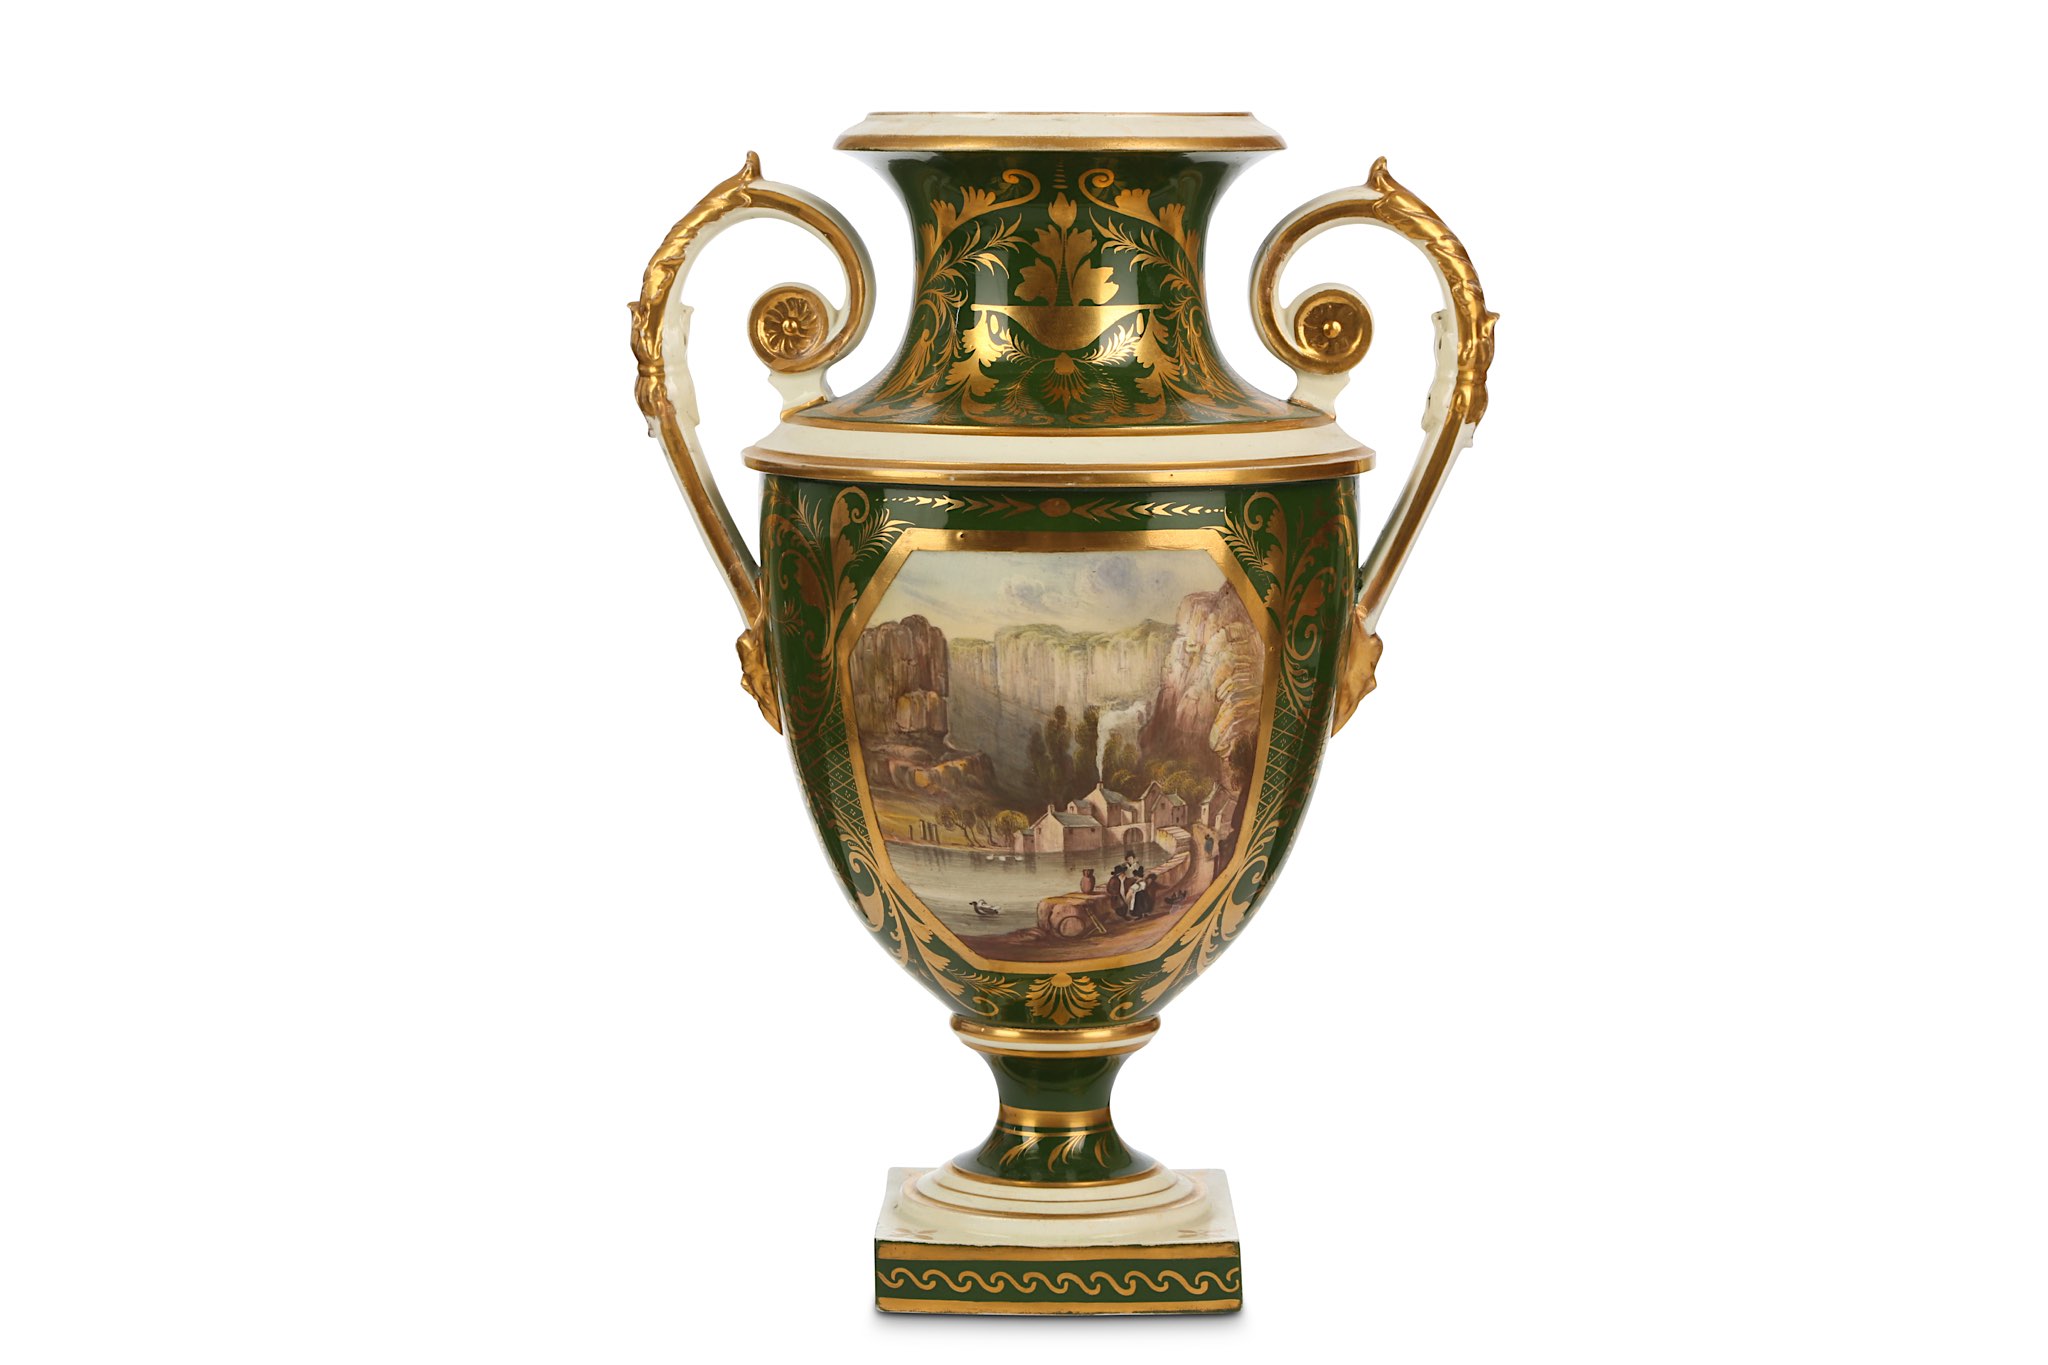 A BLOOR DERBY PORCELAIN 'NAMED VIEW' TOPOGRAPHICAL VASE, circa 1820-40, of urn-shaped form with twin